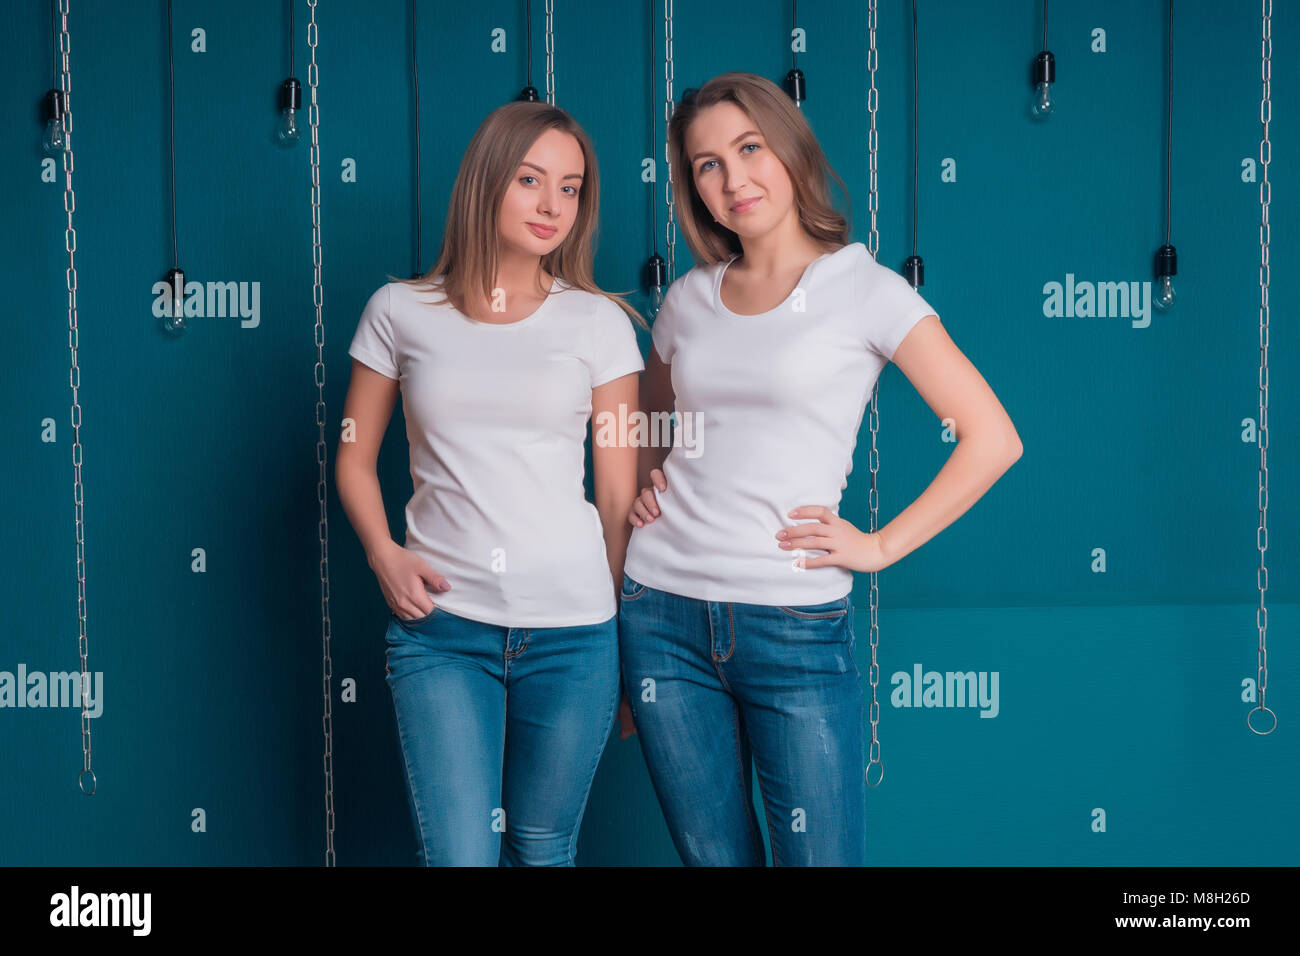 Portrait of girlfriends in white T-shirts and jeans on a dark background Stock Photo